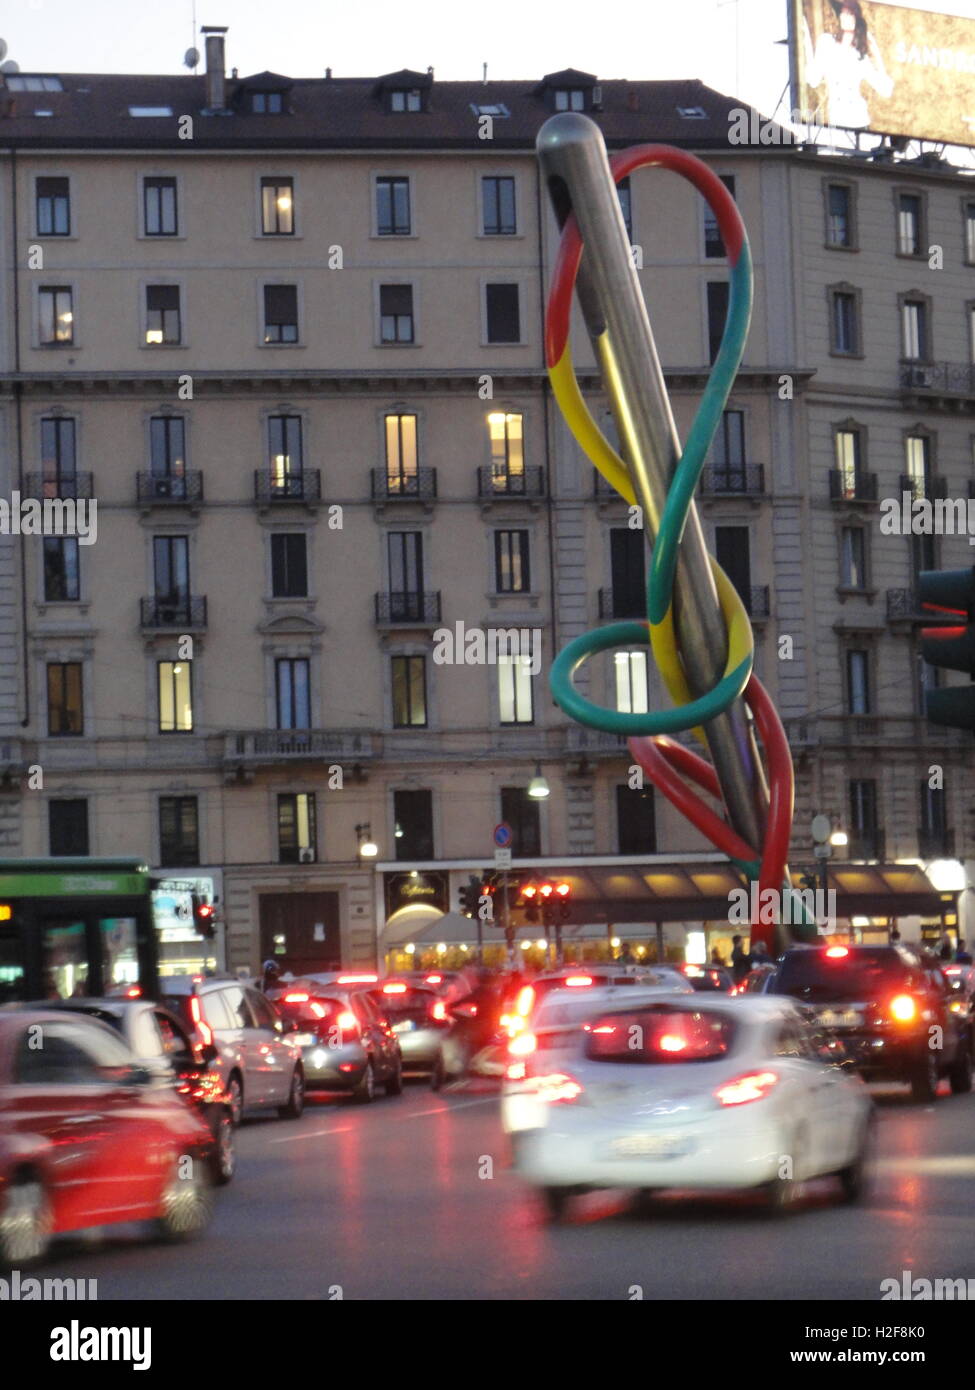 milan by night with traffic, Cadorna Station, 'Ago e filo' sculpture by the famous artist Claes Oldenburg Stock Photo